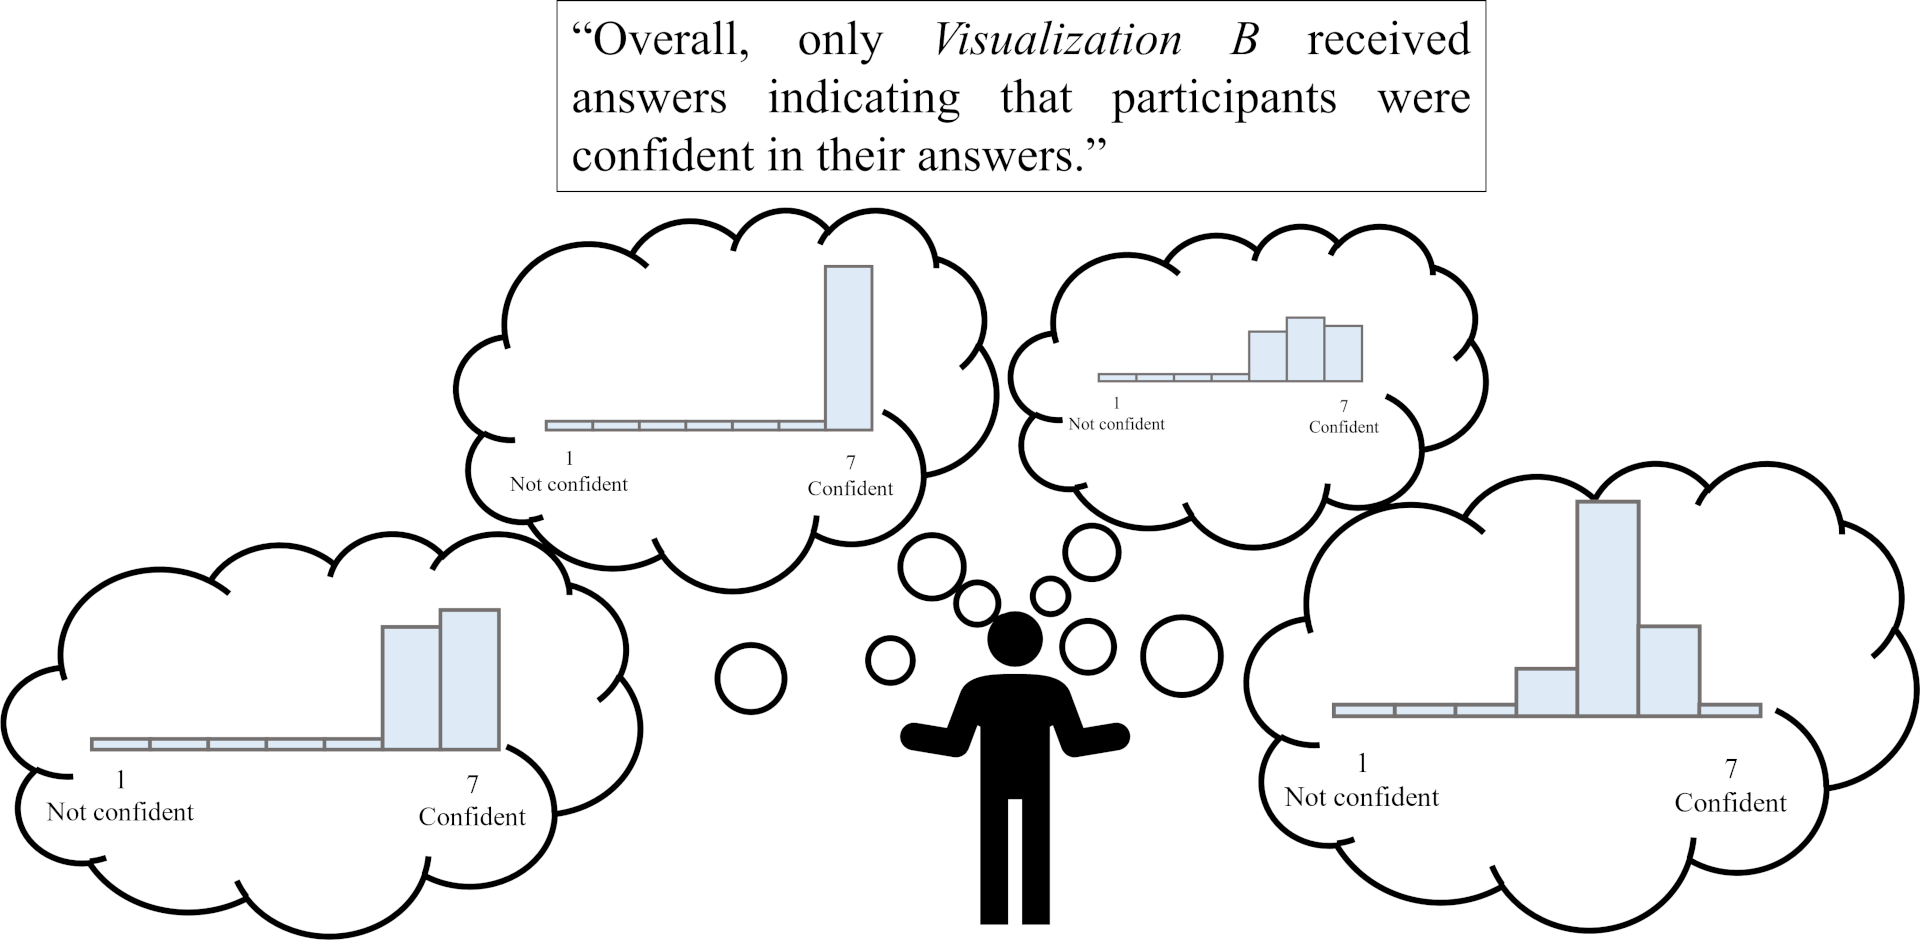 A box with text reads 'Overall, onle Visualization B received answers indicating participants were confident in their answers.' Below, a stick figure is shown in a shrugging posture surrounded by thought bubbles that each contain a different distribution of data that could hypothetically be described by the prior sentence. Some are highly skewed to the right, some are uniform among the more positive responses, and some are normally distributed.